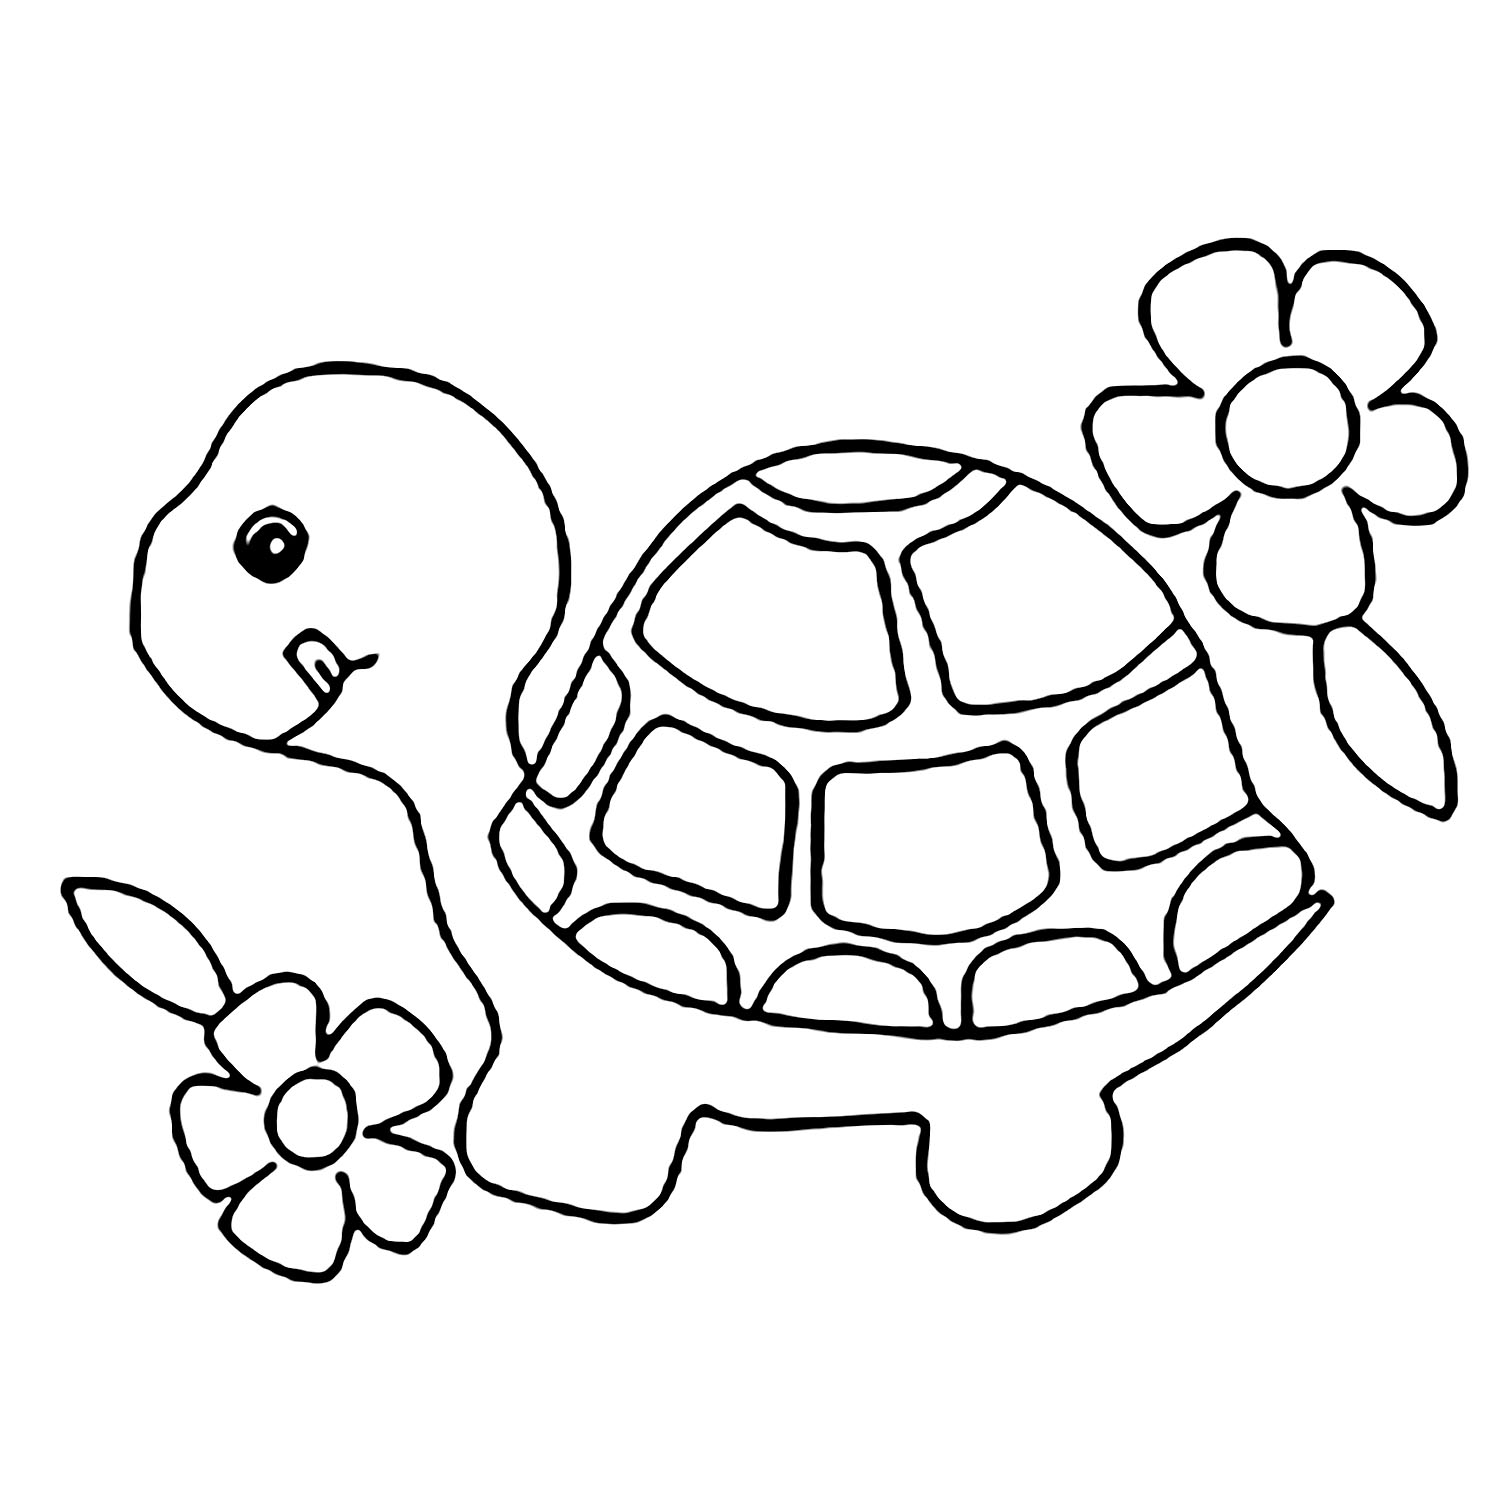 Turtle coloring pages for children Turtles Kids Coloring Pages